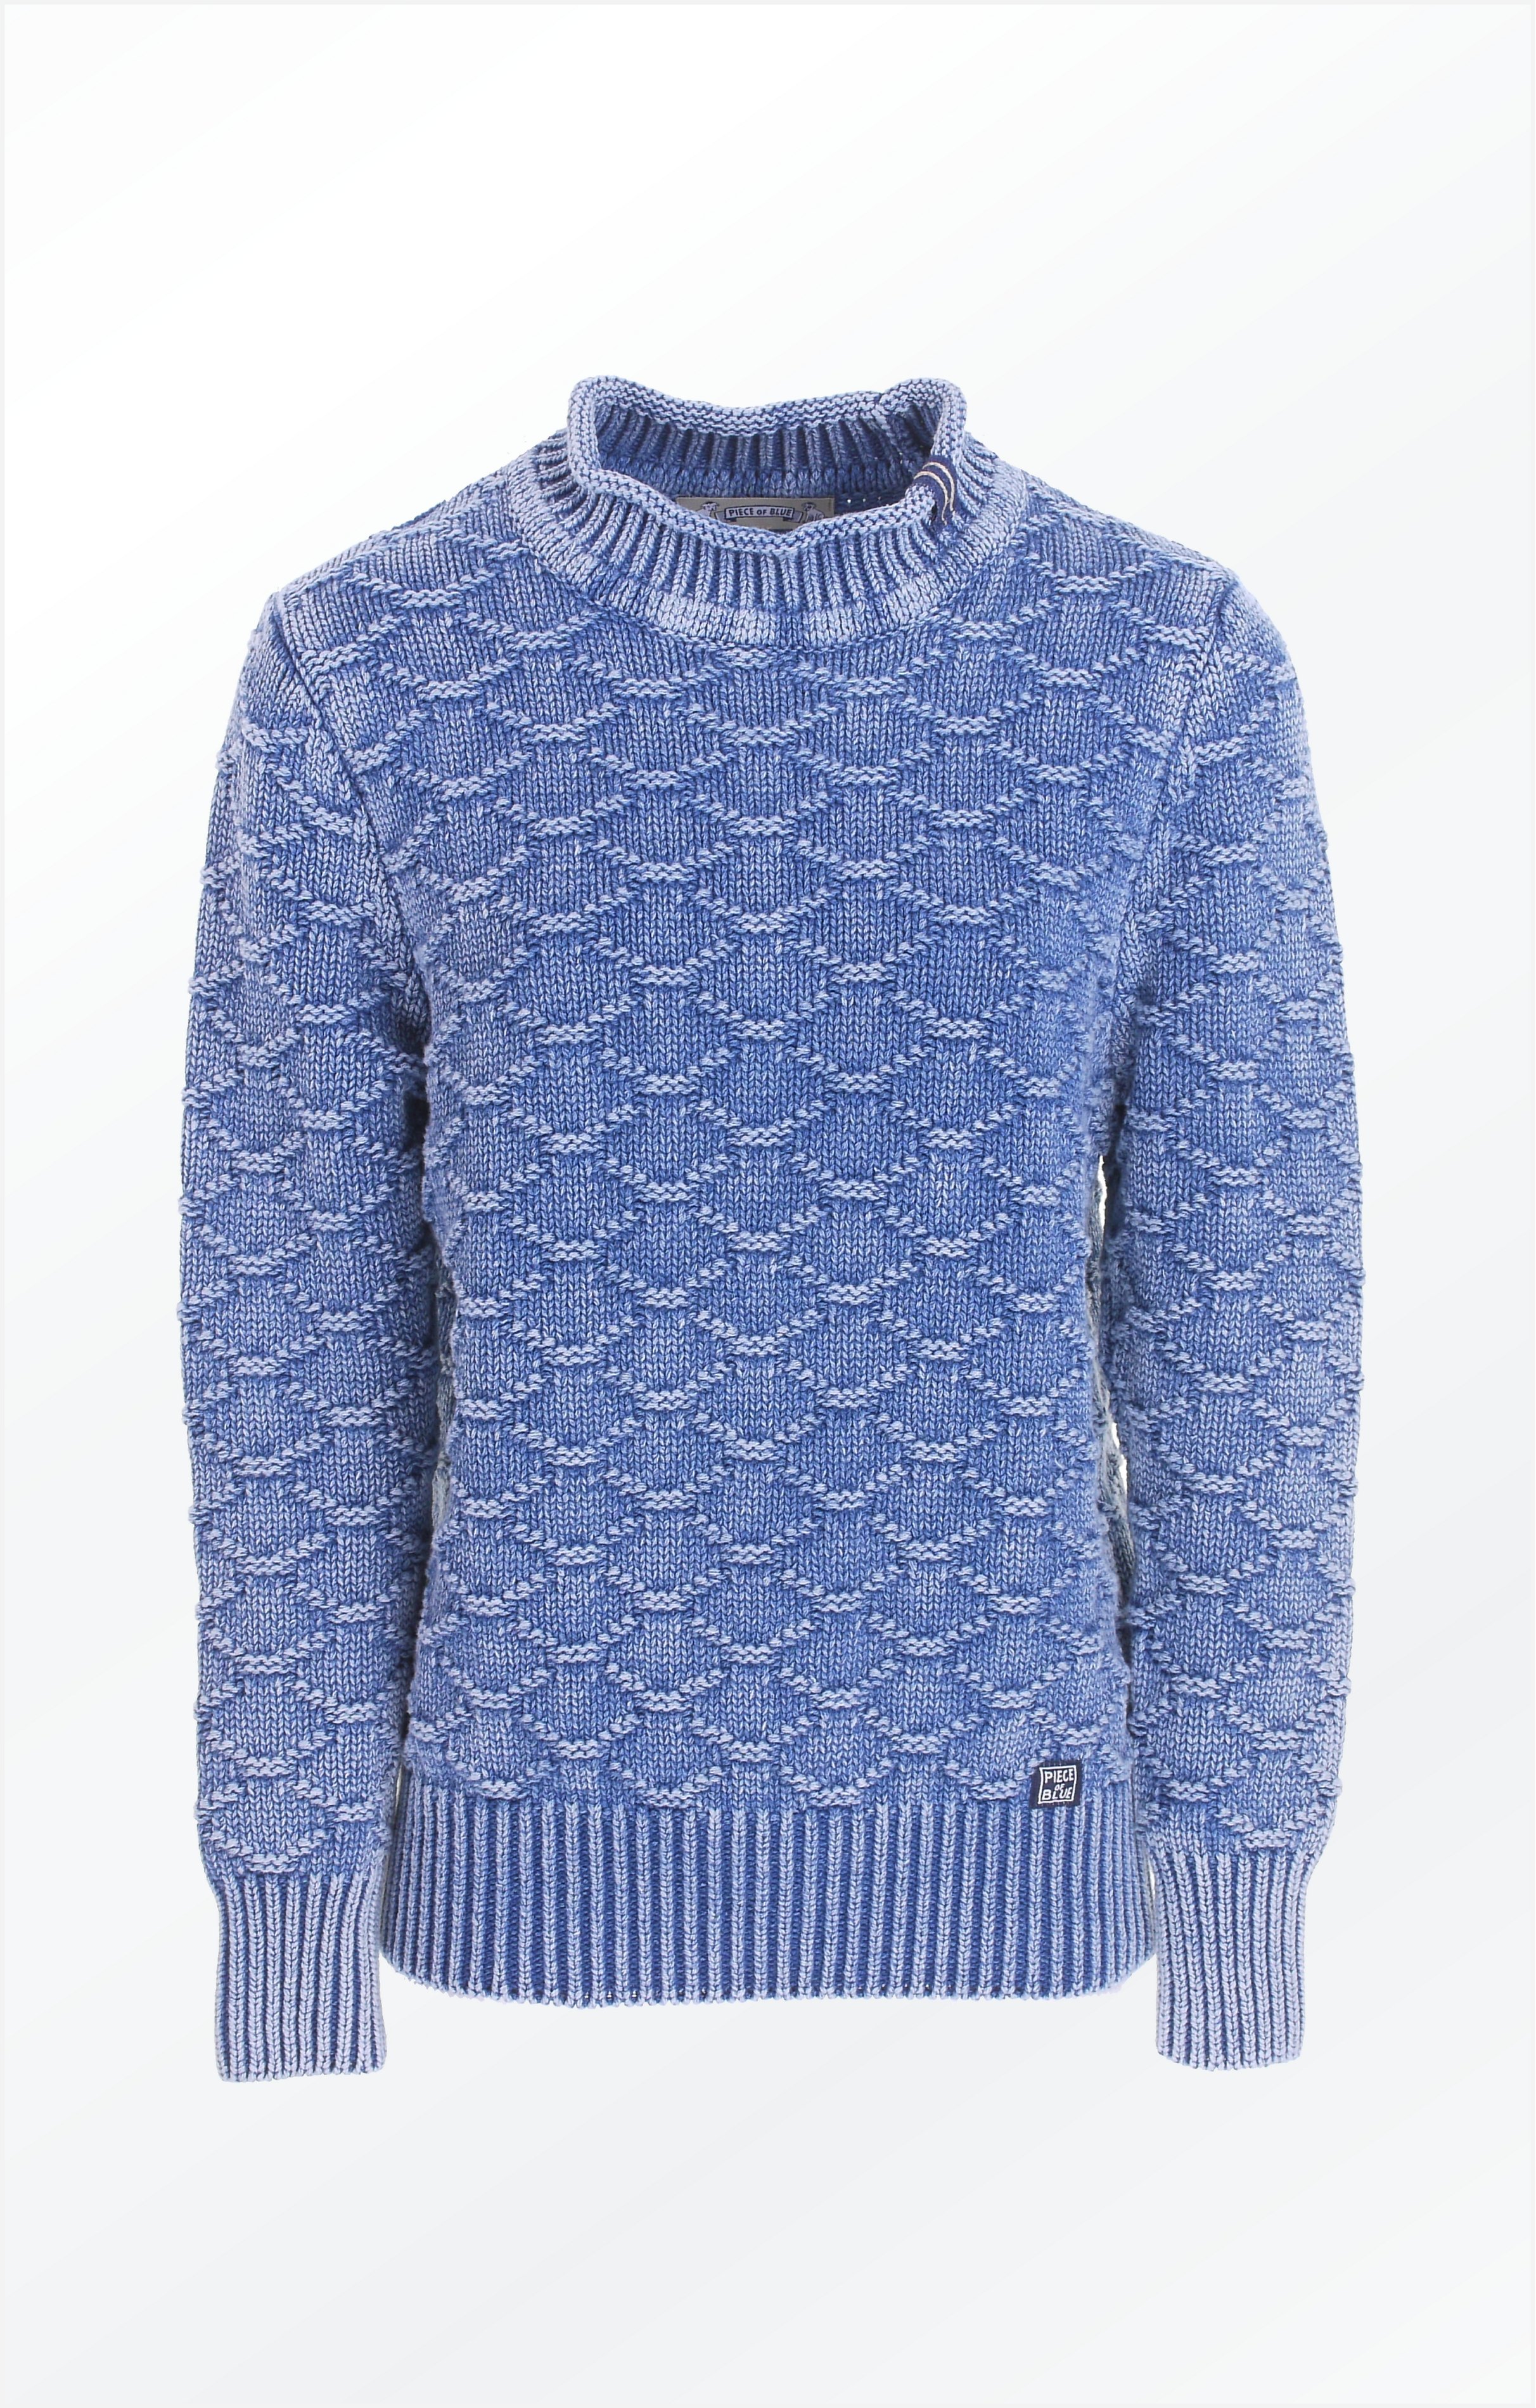 YUMMY AND COZY HEAVY KNITTED PULLOVER - LIGHT INDIGO BLUE